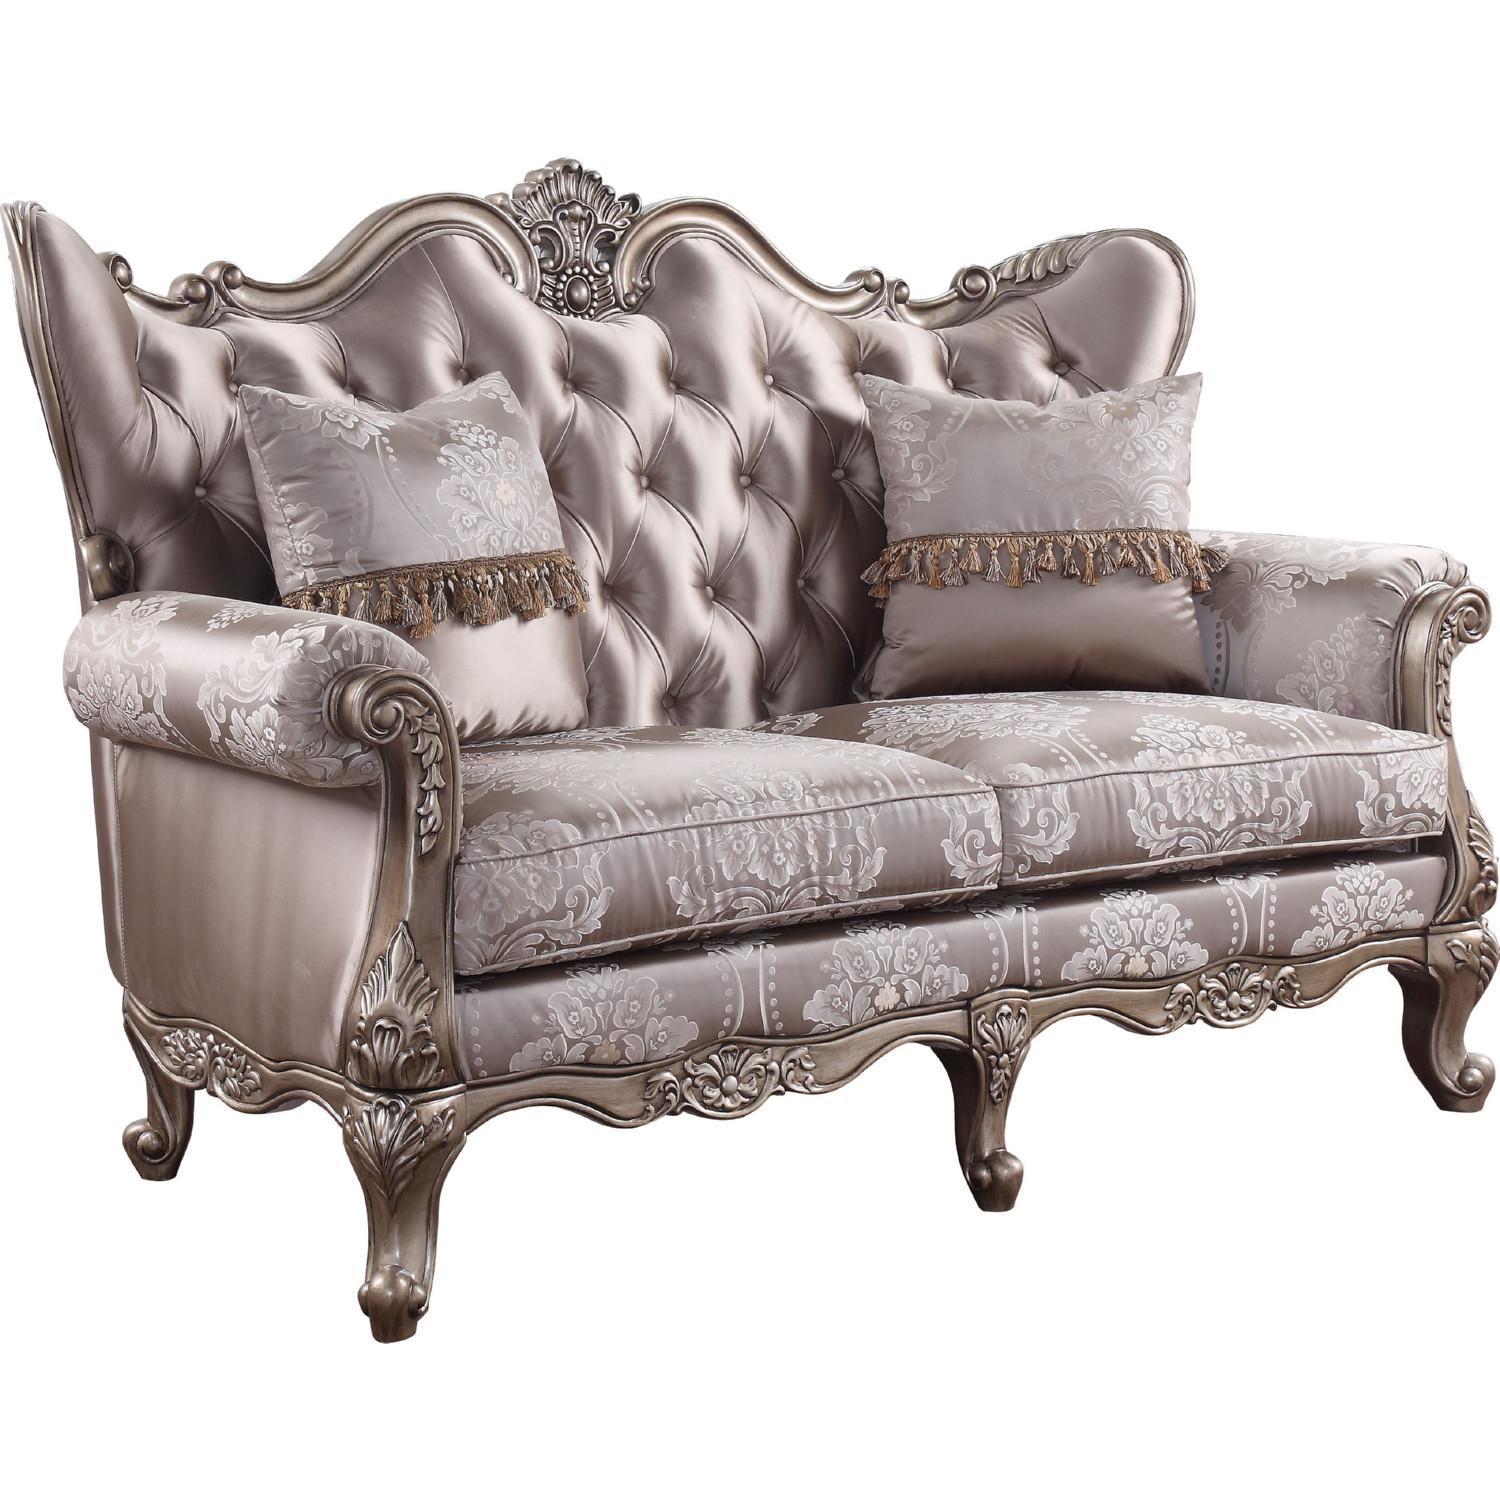 Traditional,  Vintage Loveseat Jayceon 54866 54866 Jayceon in Champagne Fabric